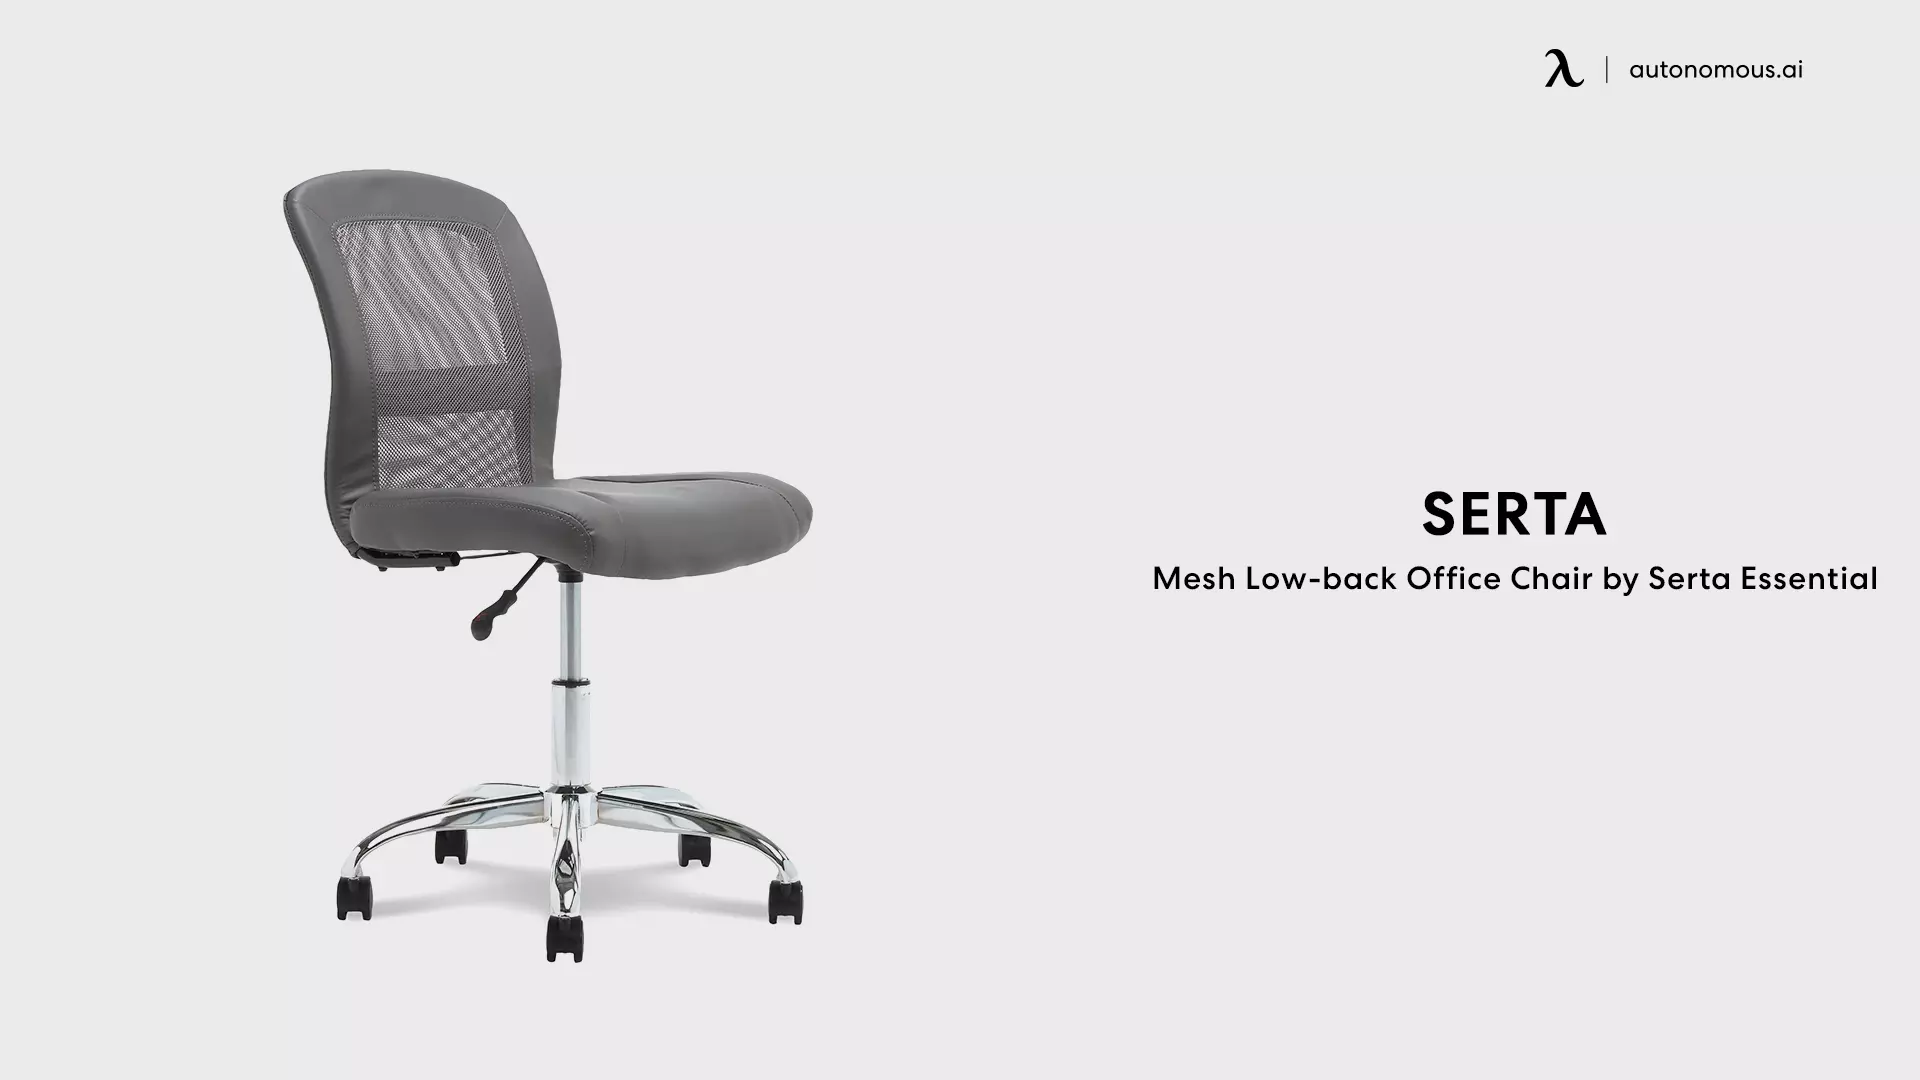 Mesh Low-back Office Chair by Serta Essential